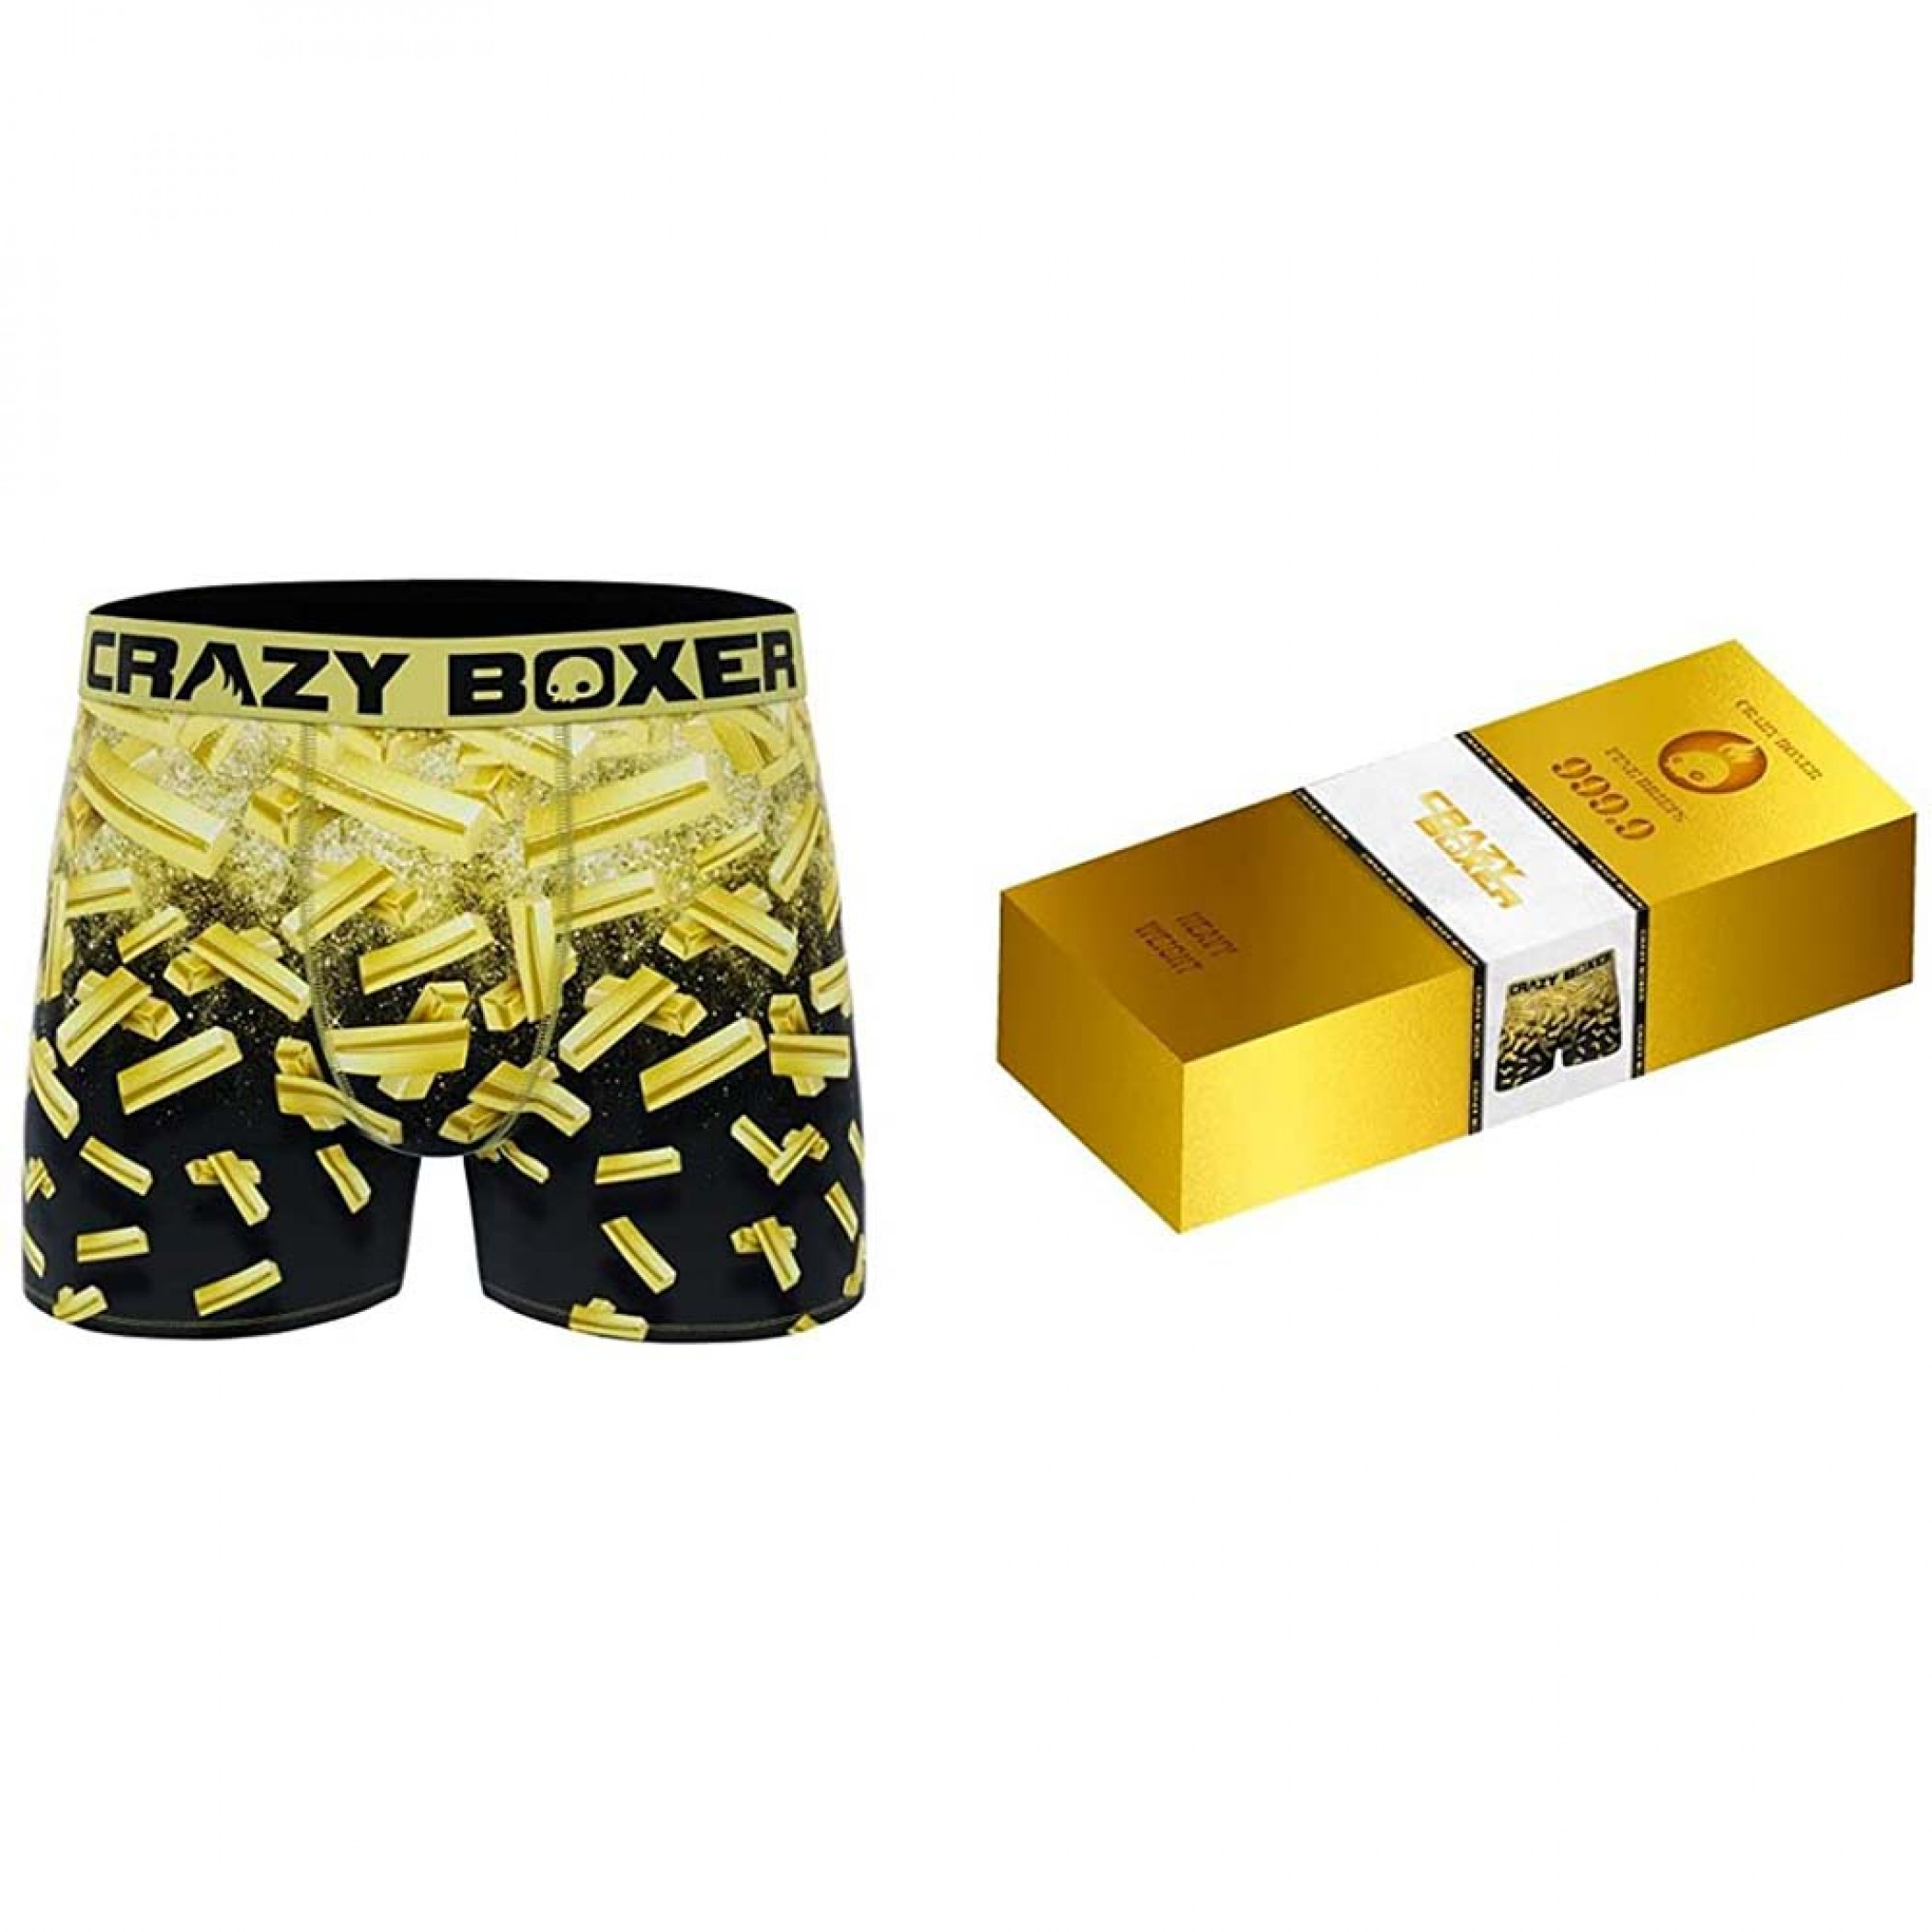 https://mmv2api.s3.us-east-2.amazonaws.com/products/images/CRAZYBOXER%20Gold%20Bar%20Men's%20Boxer%20Briefs%20(Creative%20Packaging).jpg